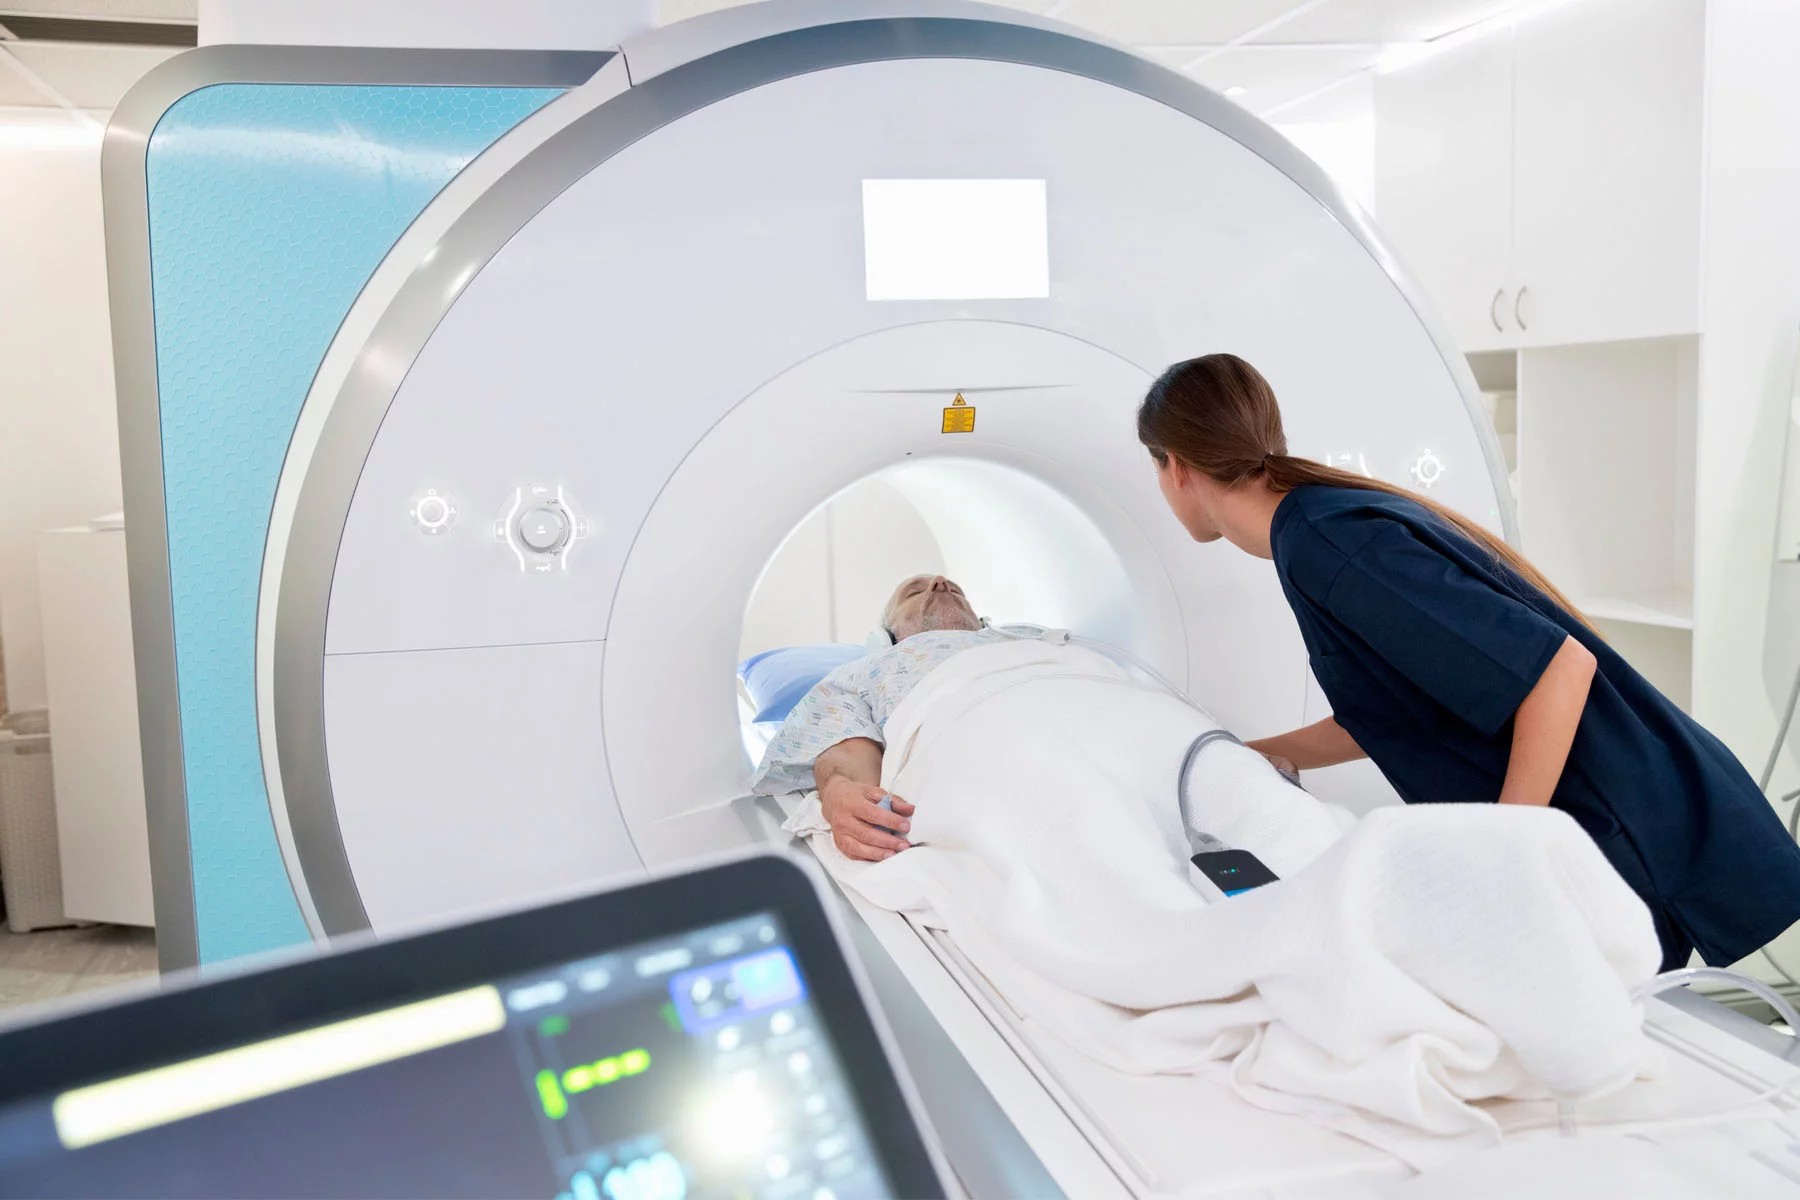 hospitals in Luxembourg provide specialist treatments: patient getting an MRI